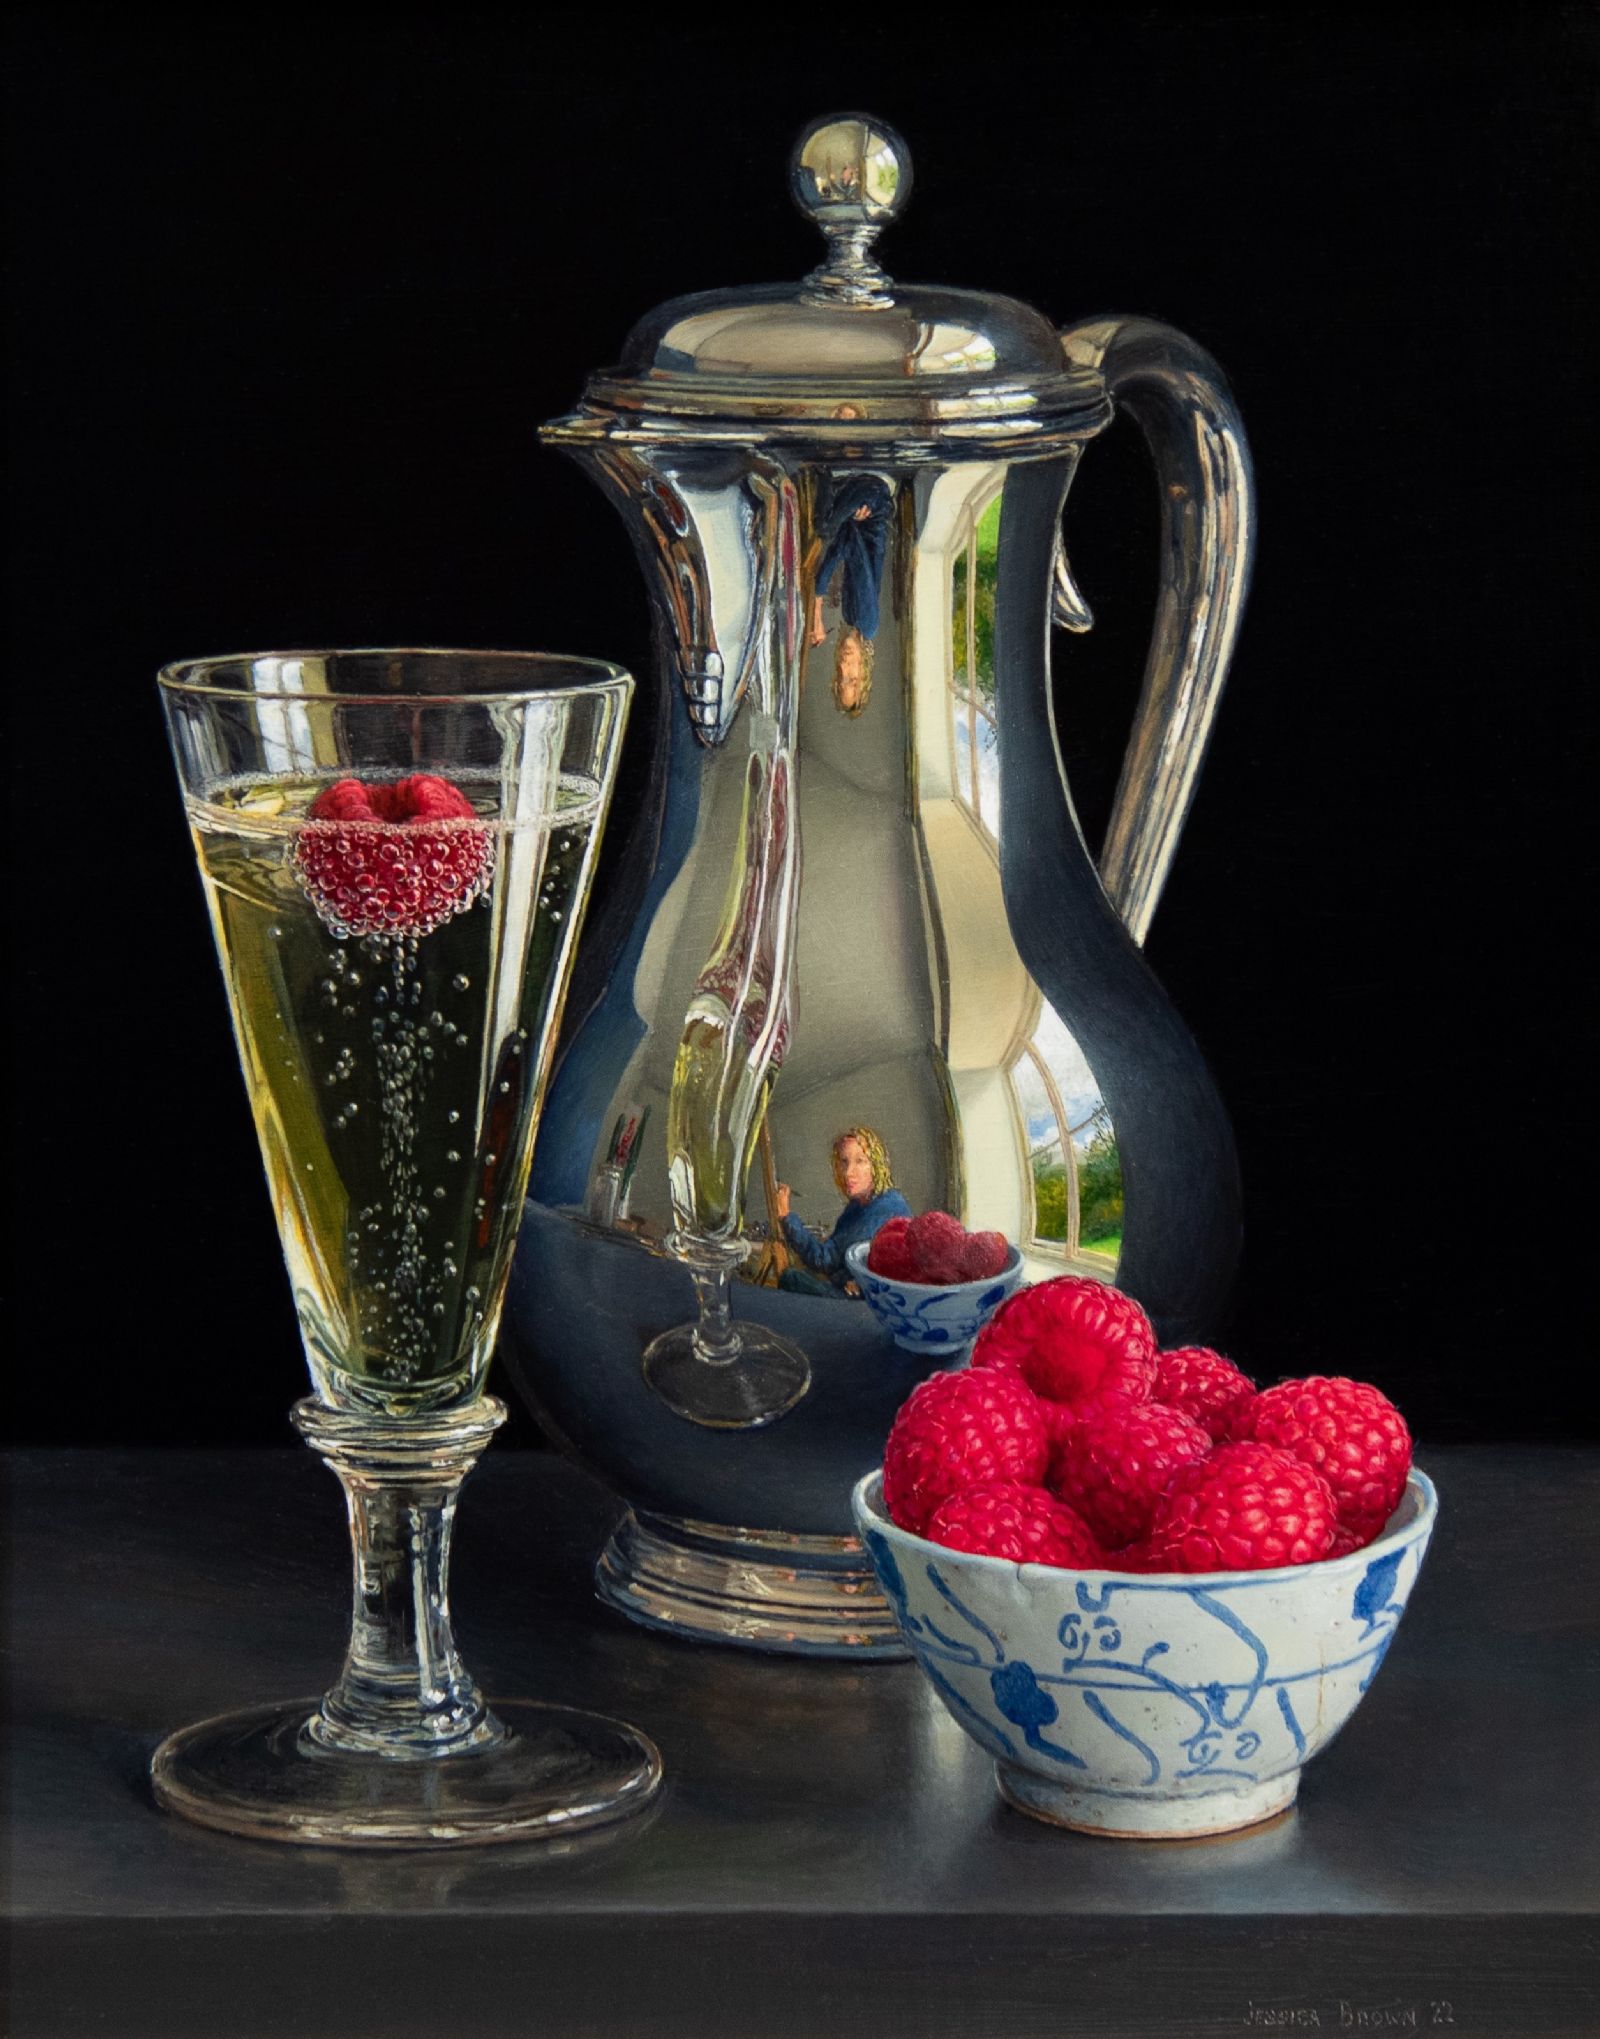 Still Life with Silver Jug, Champagne and Raspberries by Jessica Brown